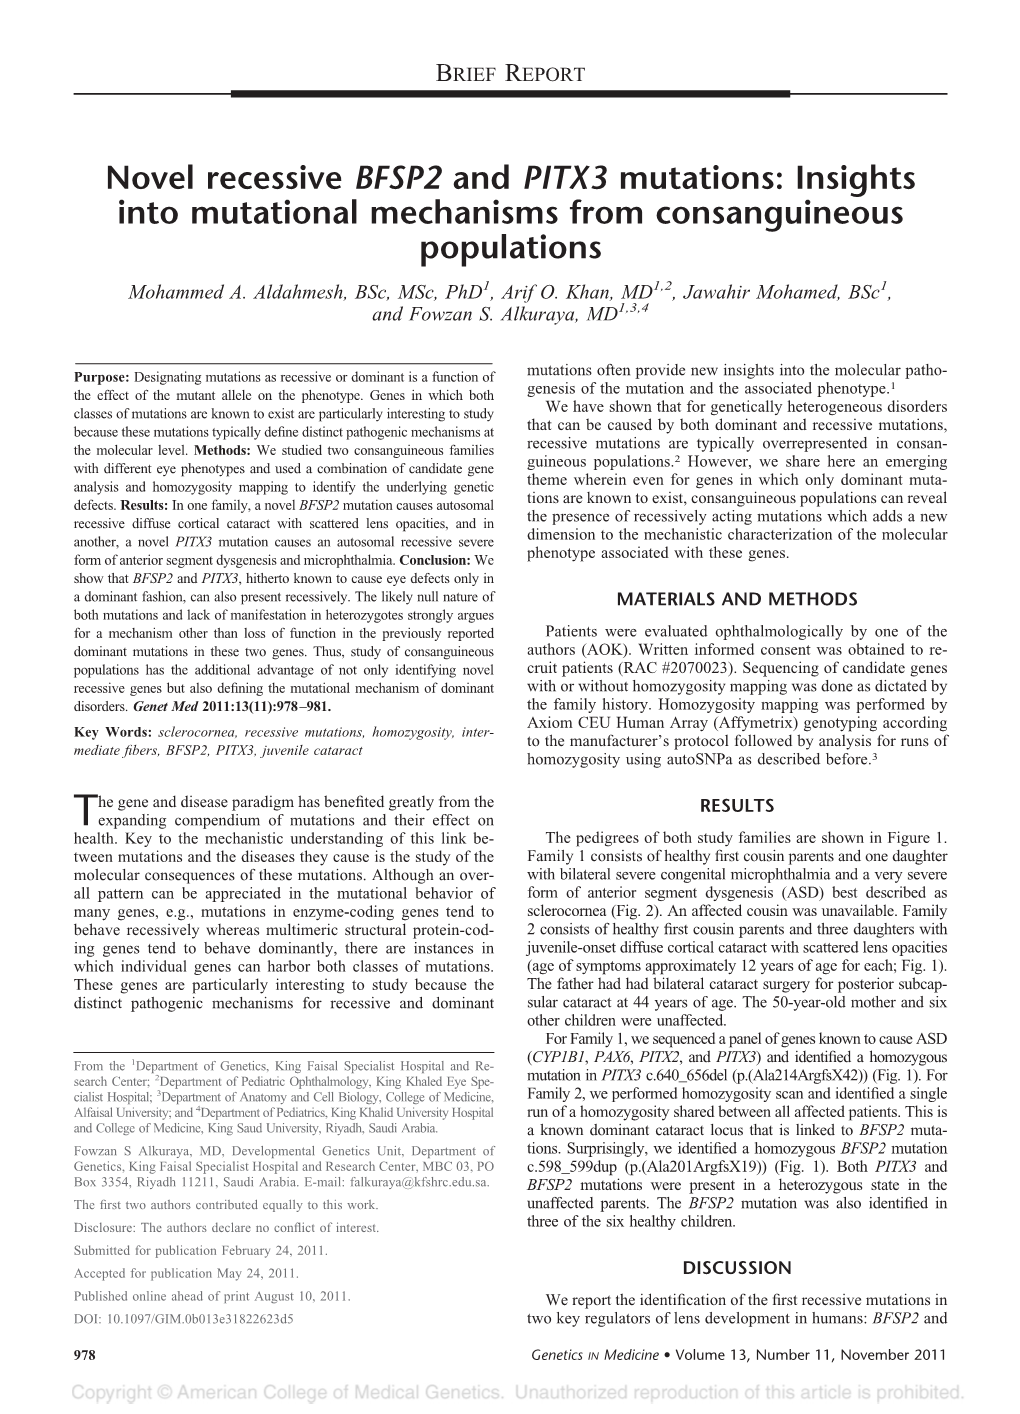 Novel Recessive BFSP2 and PITX3 Mutations: Insights Into Mutational Mechanisms from Consanguineous Populations Mohammed A